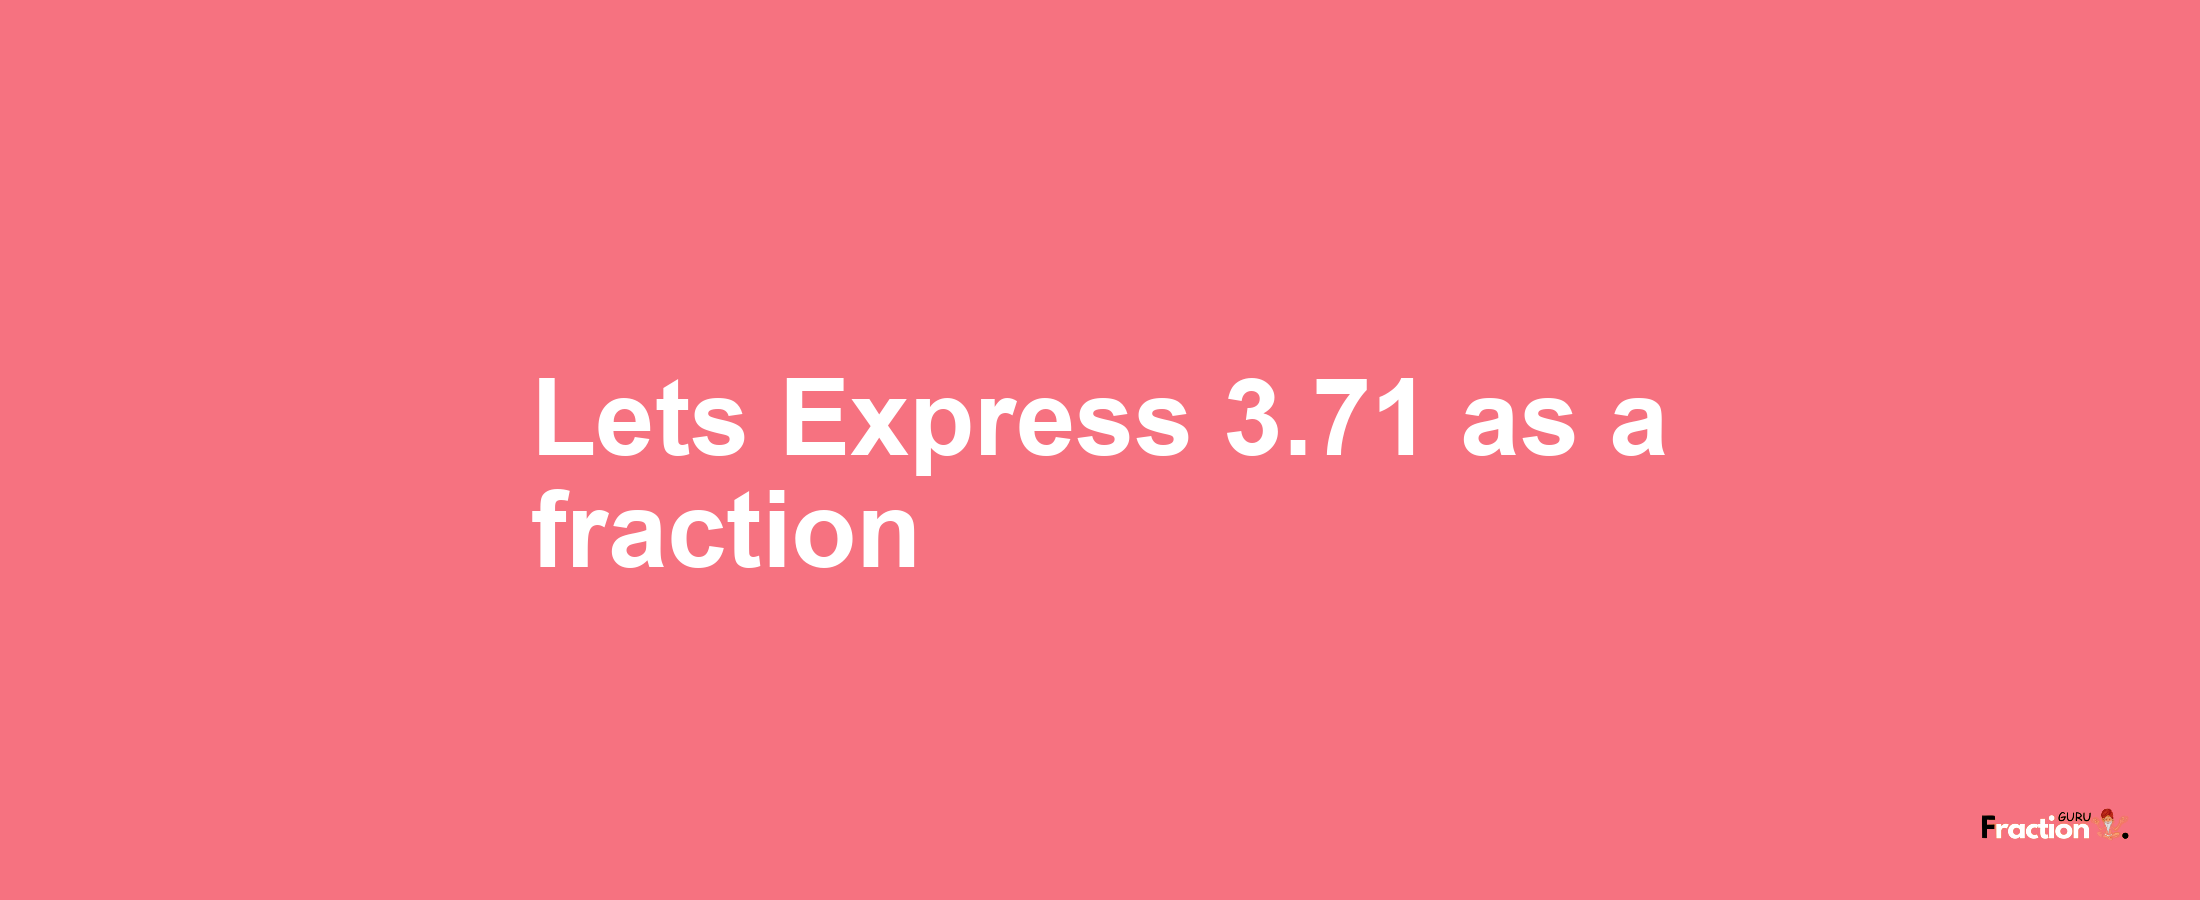 Lets Express 3.71 as afraction